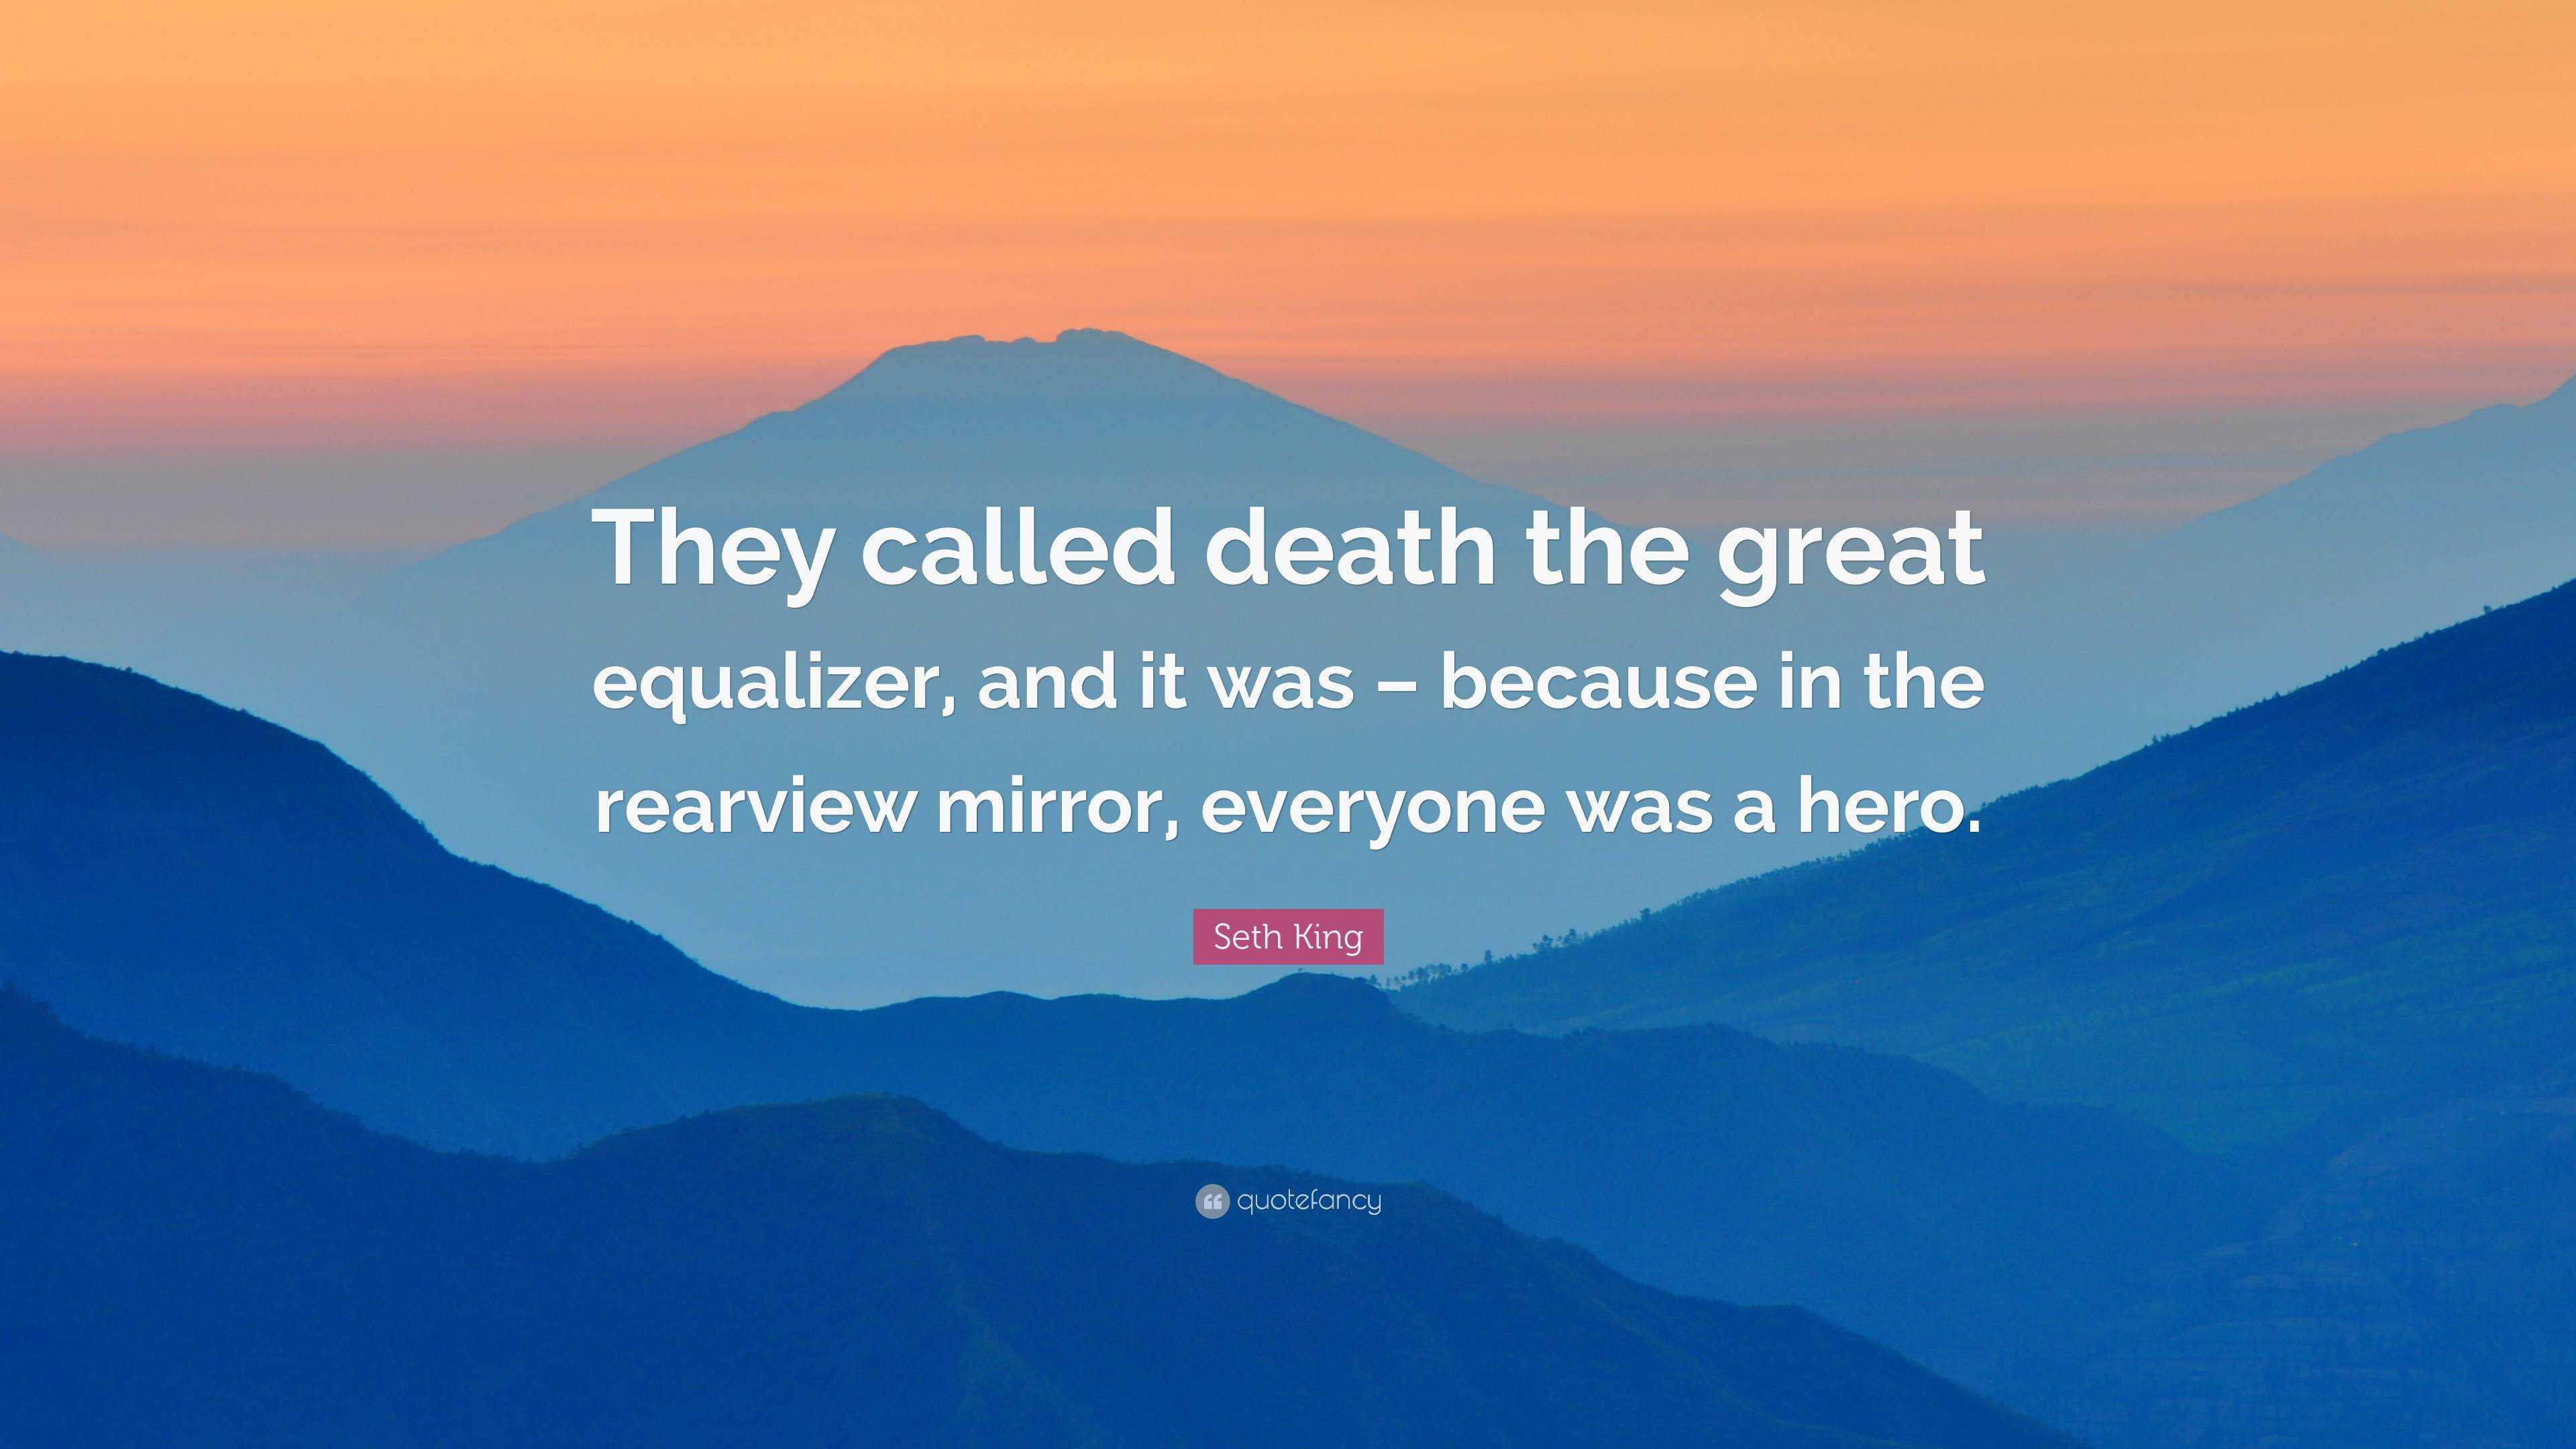 Seth King Quote: “They called death the great equalizer, and it was ...